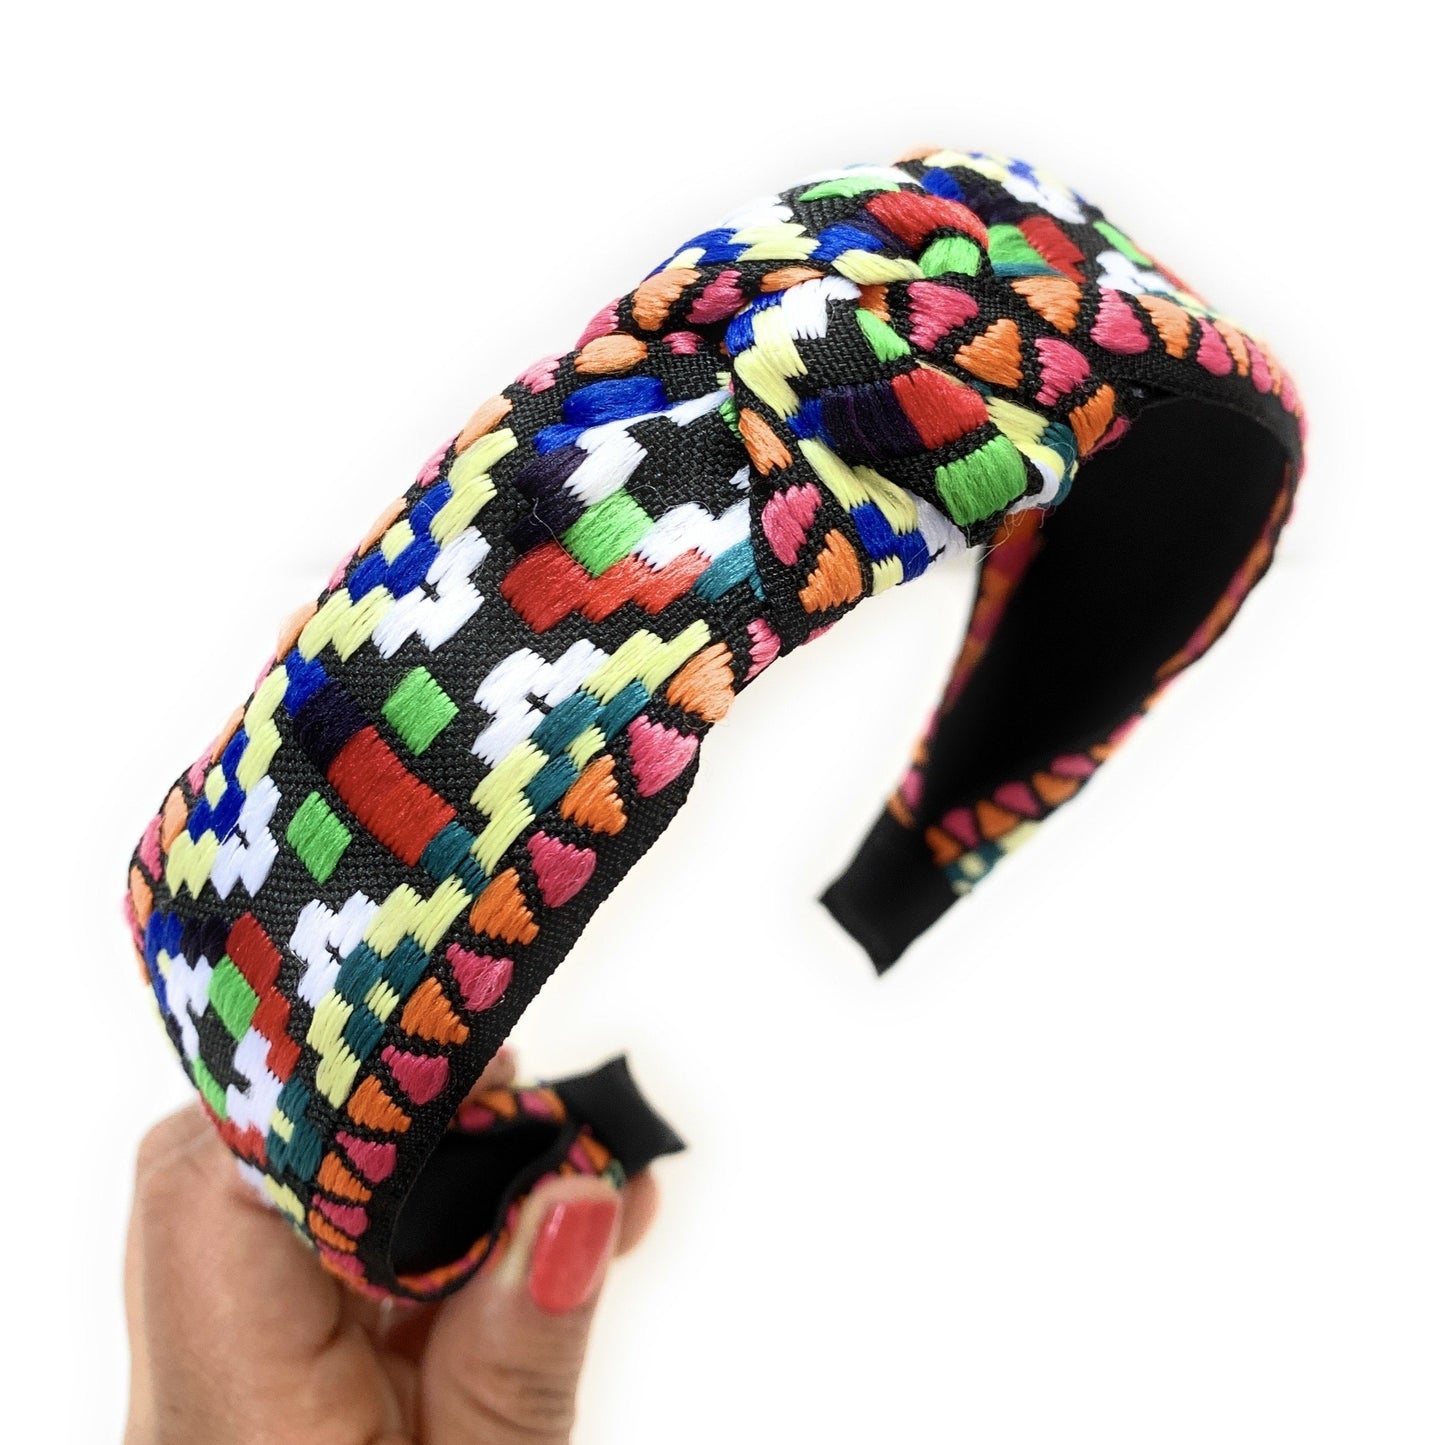 Embroidered Top Knot Headband (Multicolor)